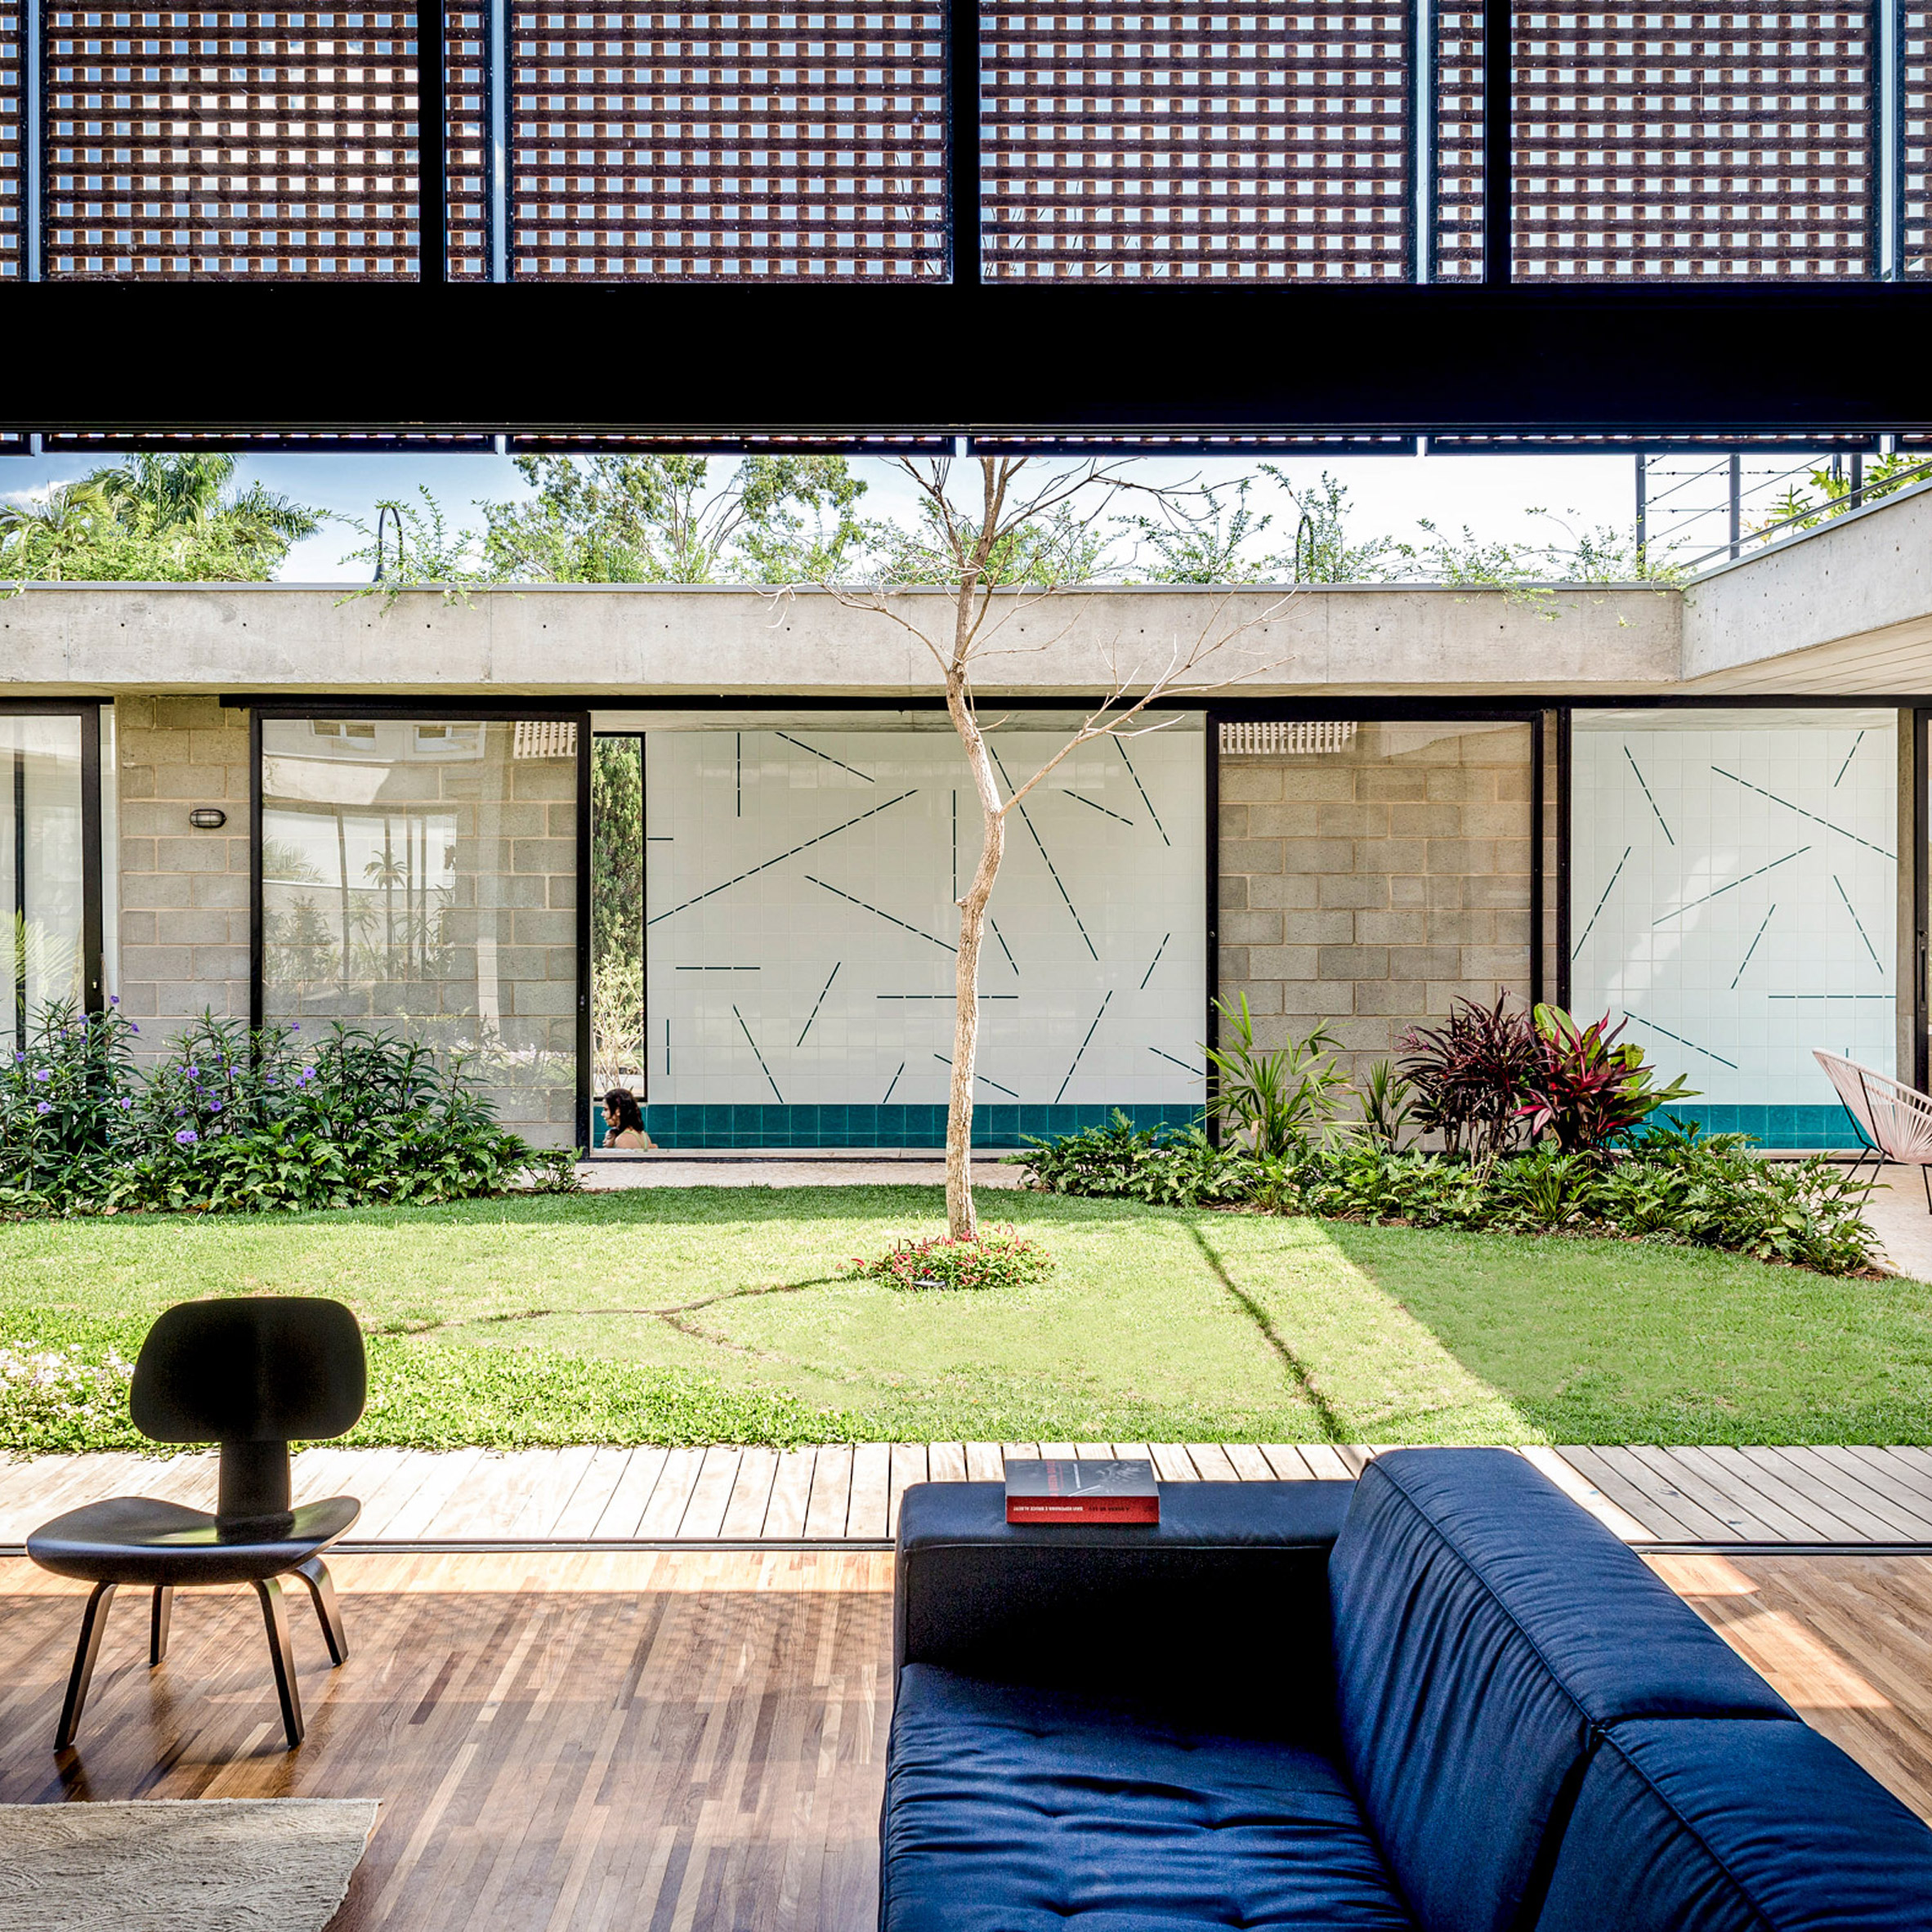 Living area with opening to a grassy courtyard with a central tree